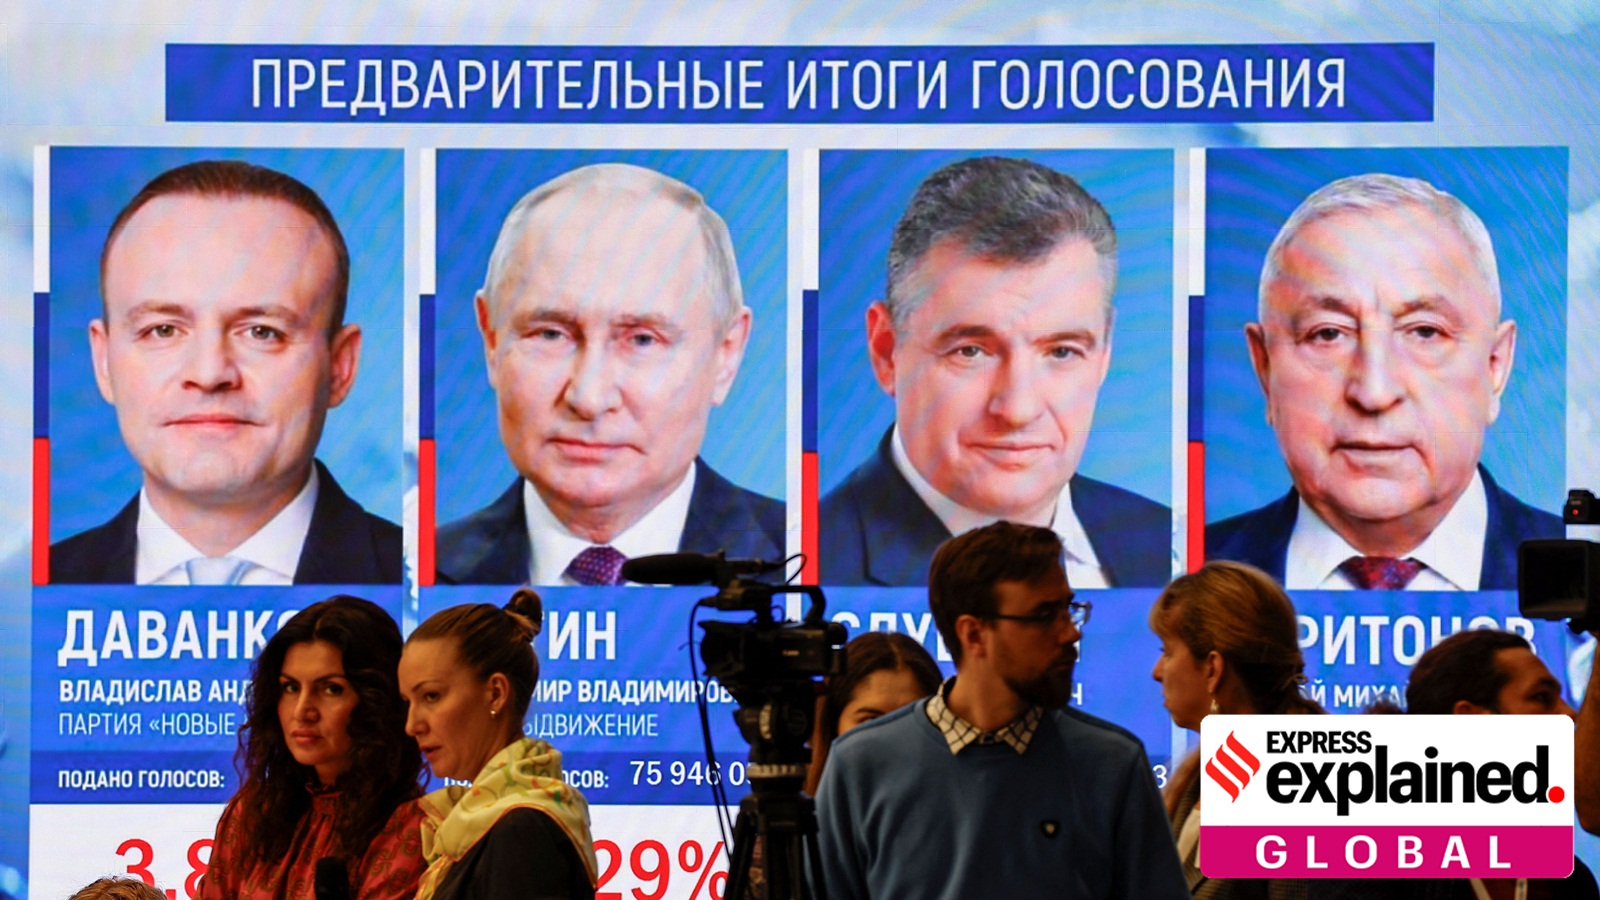 Vladimir Putin won the Russian elections with 87 per cent of the vote. Who were the candidates against him?